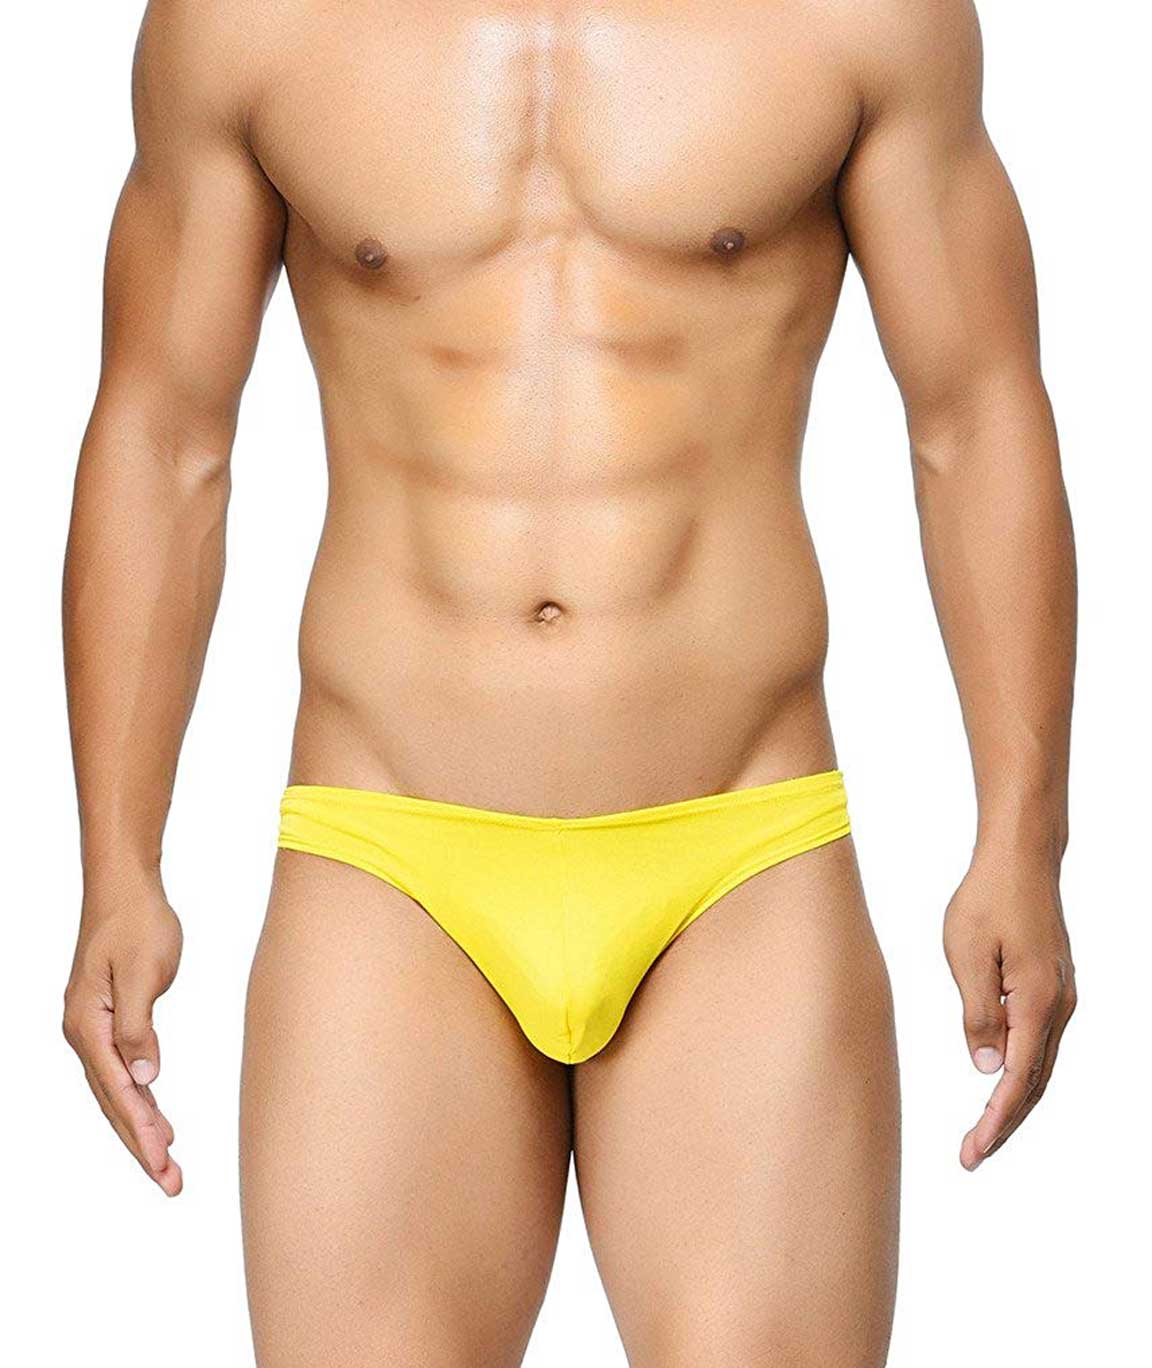 BASIICS by La Intimo Men`s Yellow Polyester Spandex Semi-Seamless Feather Weight Brief